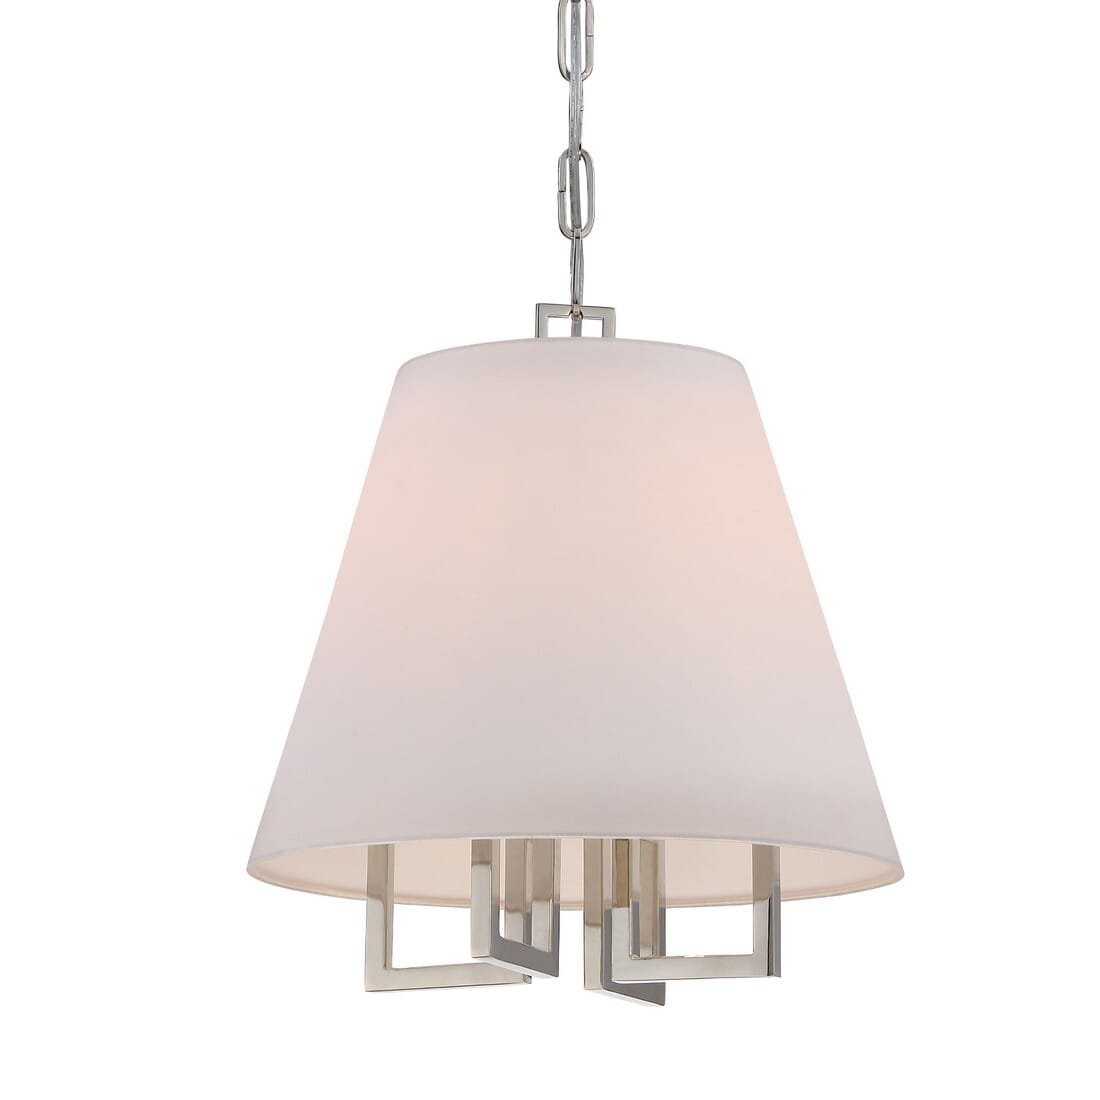 Libby Langdon for Westwood 14" Mini Chandelier in Polished Nickel